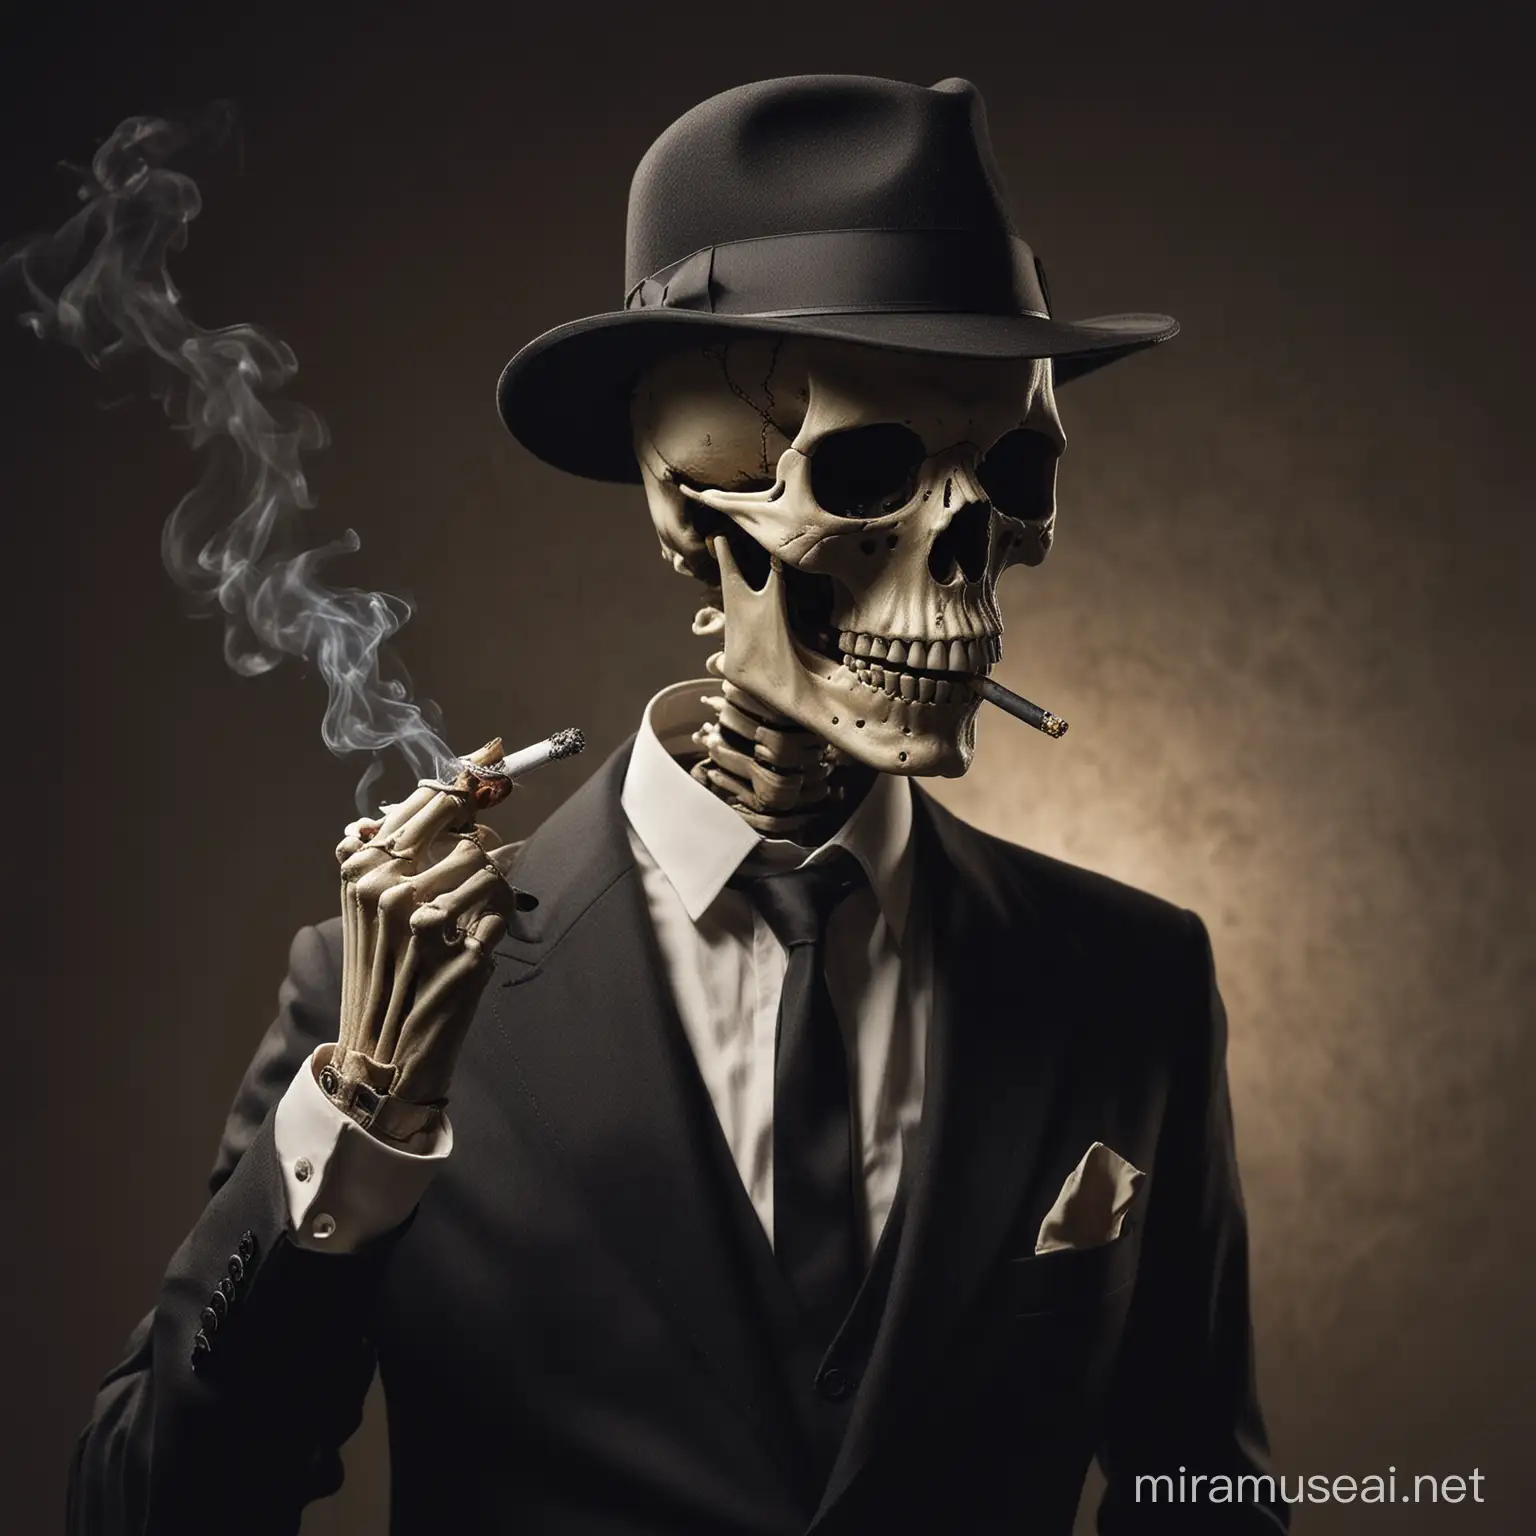 Stylish Skeleton Smoking a Cigarette in Fedora and Suit